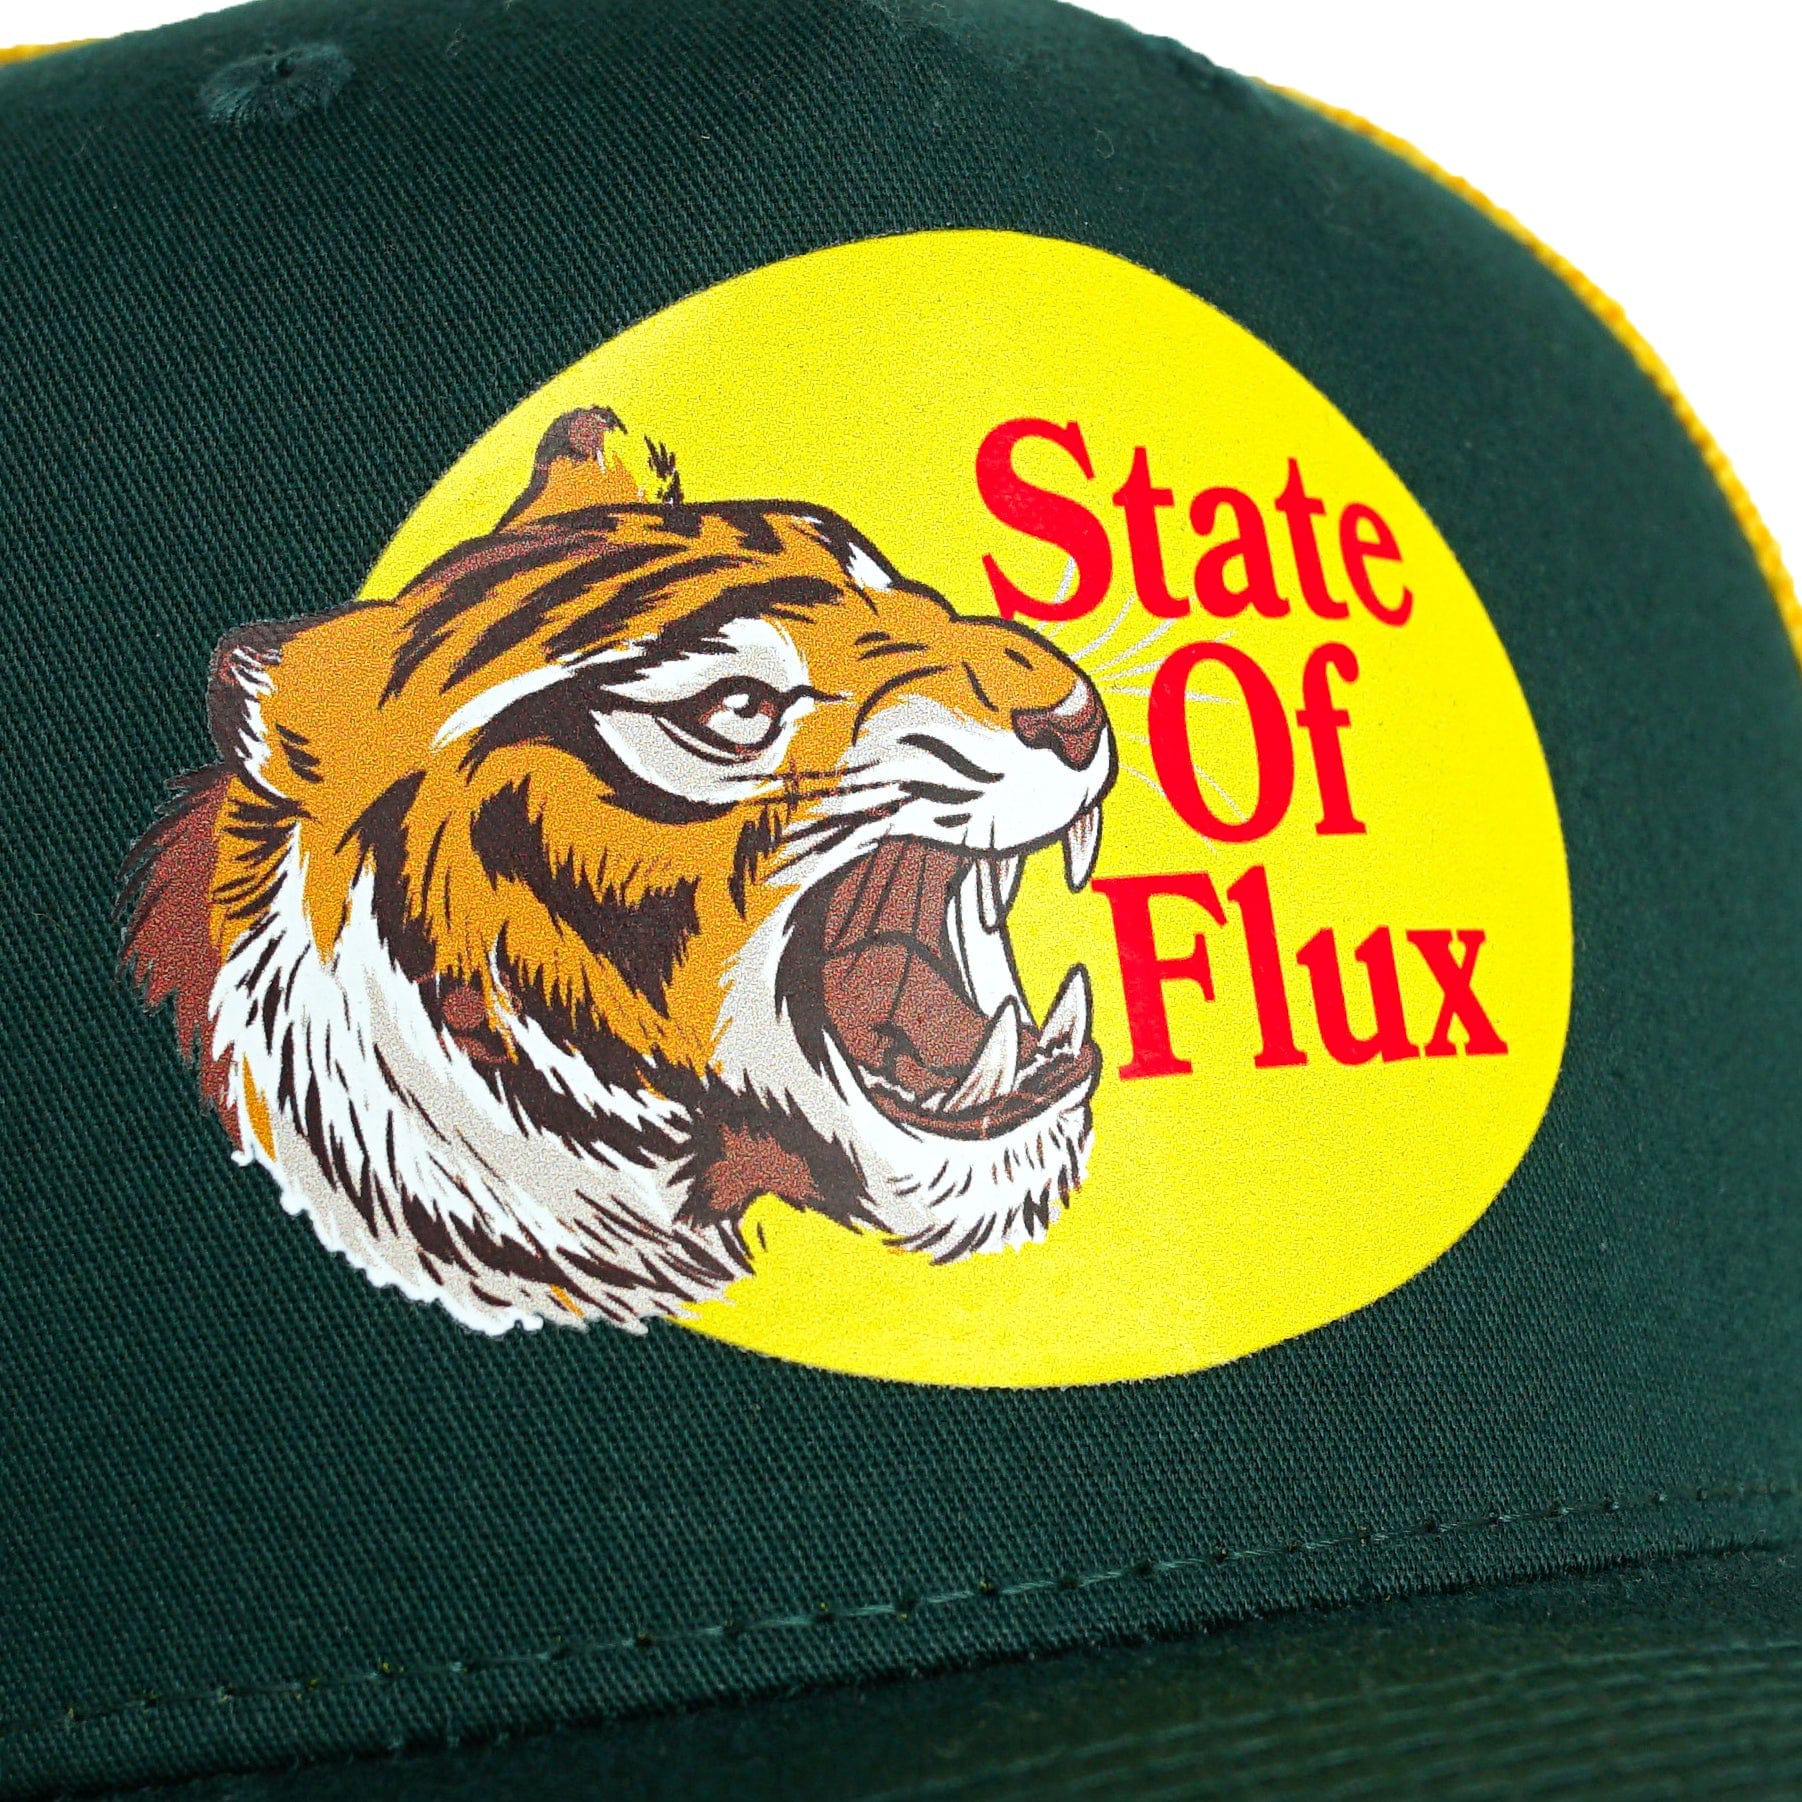 Tiger Pro Trucker Hat in forest green and dandelion - State Of Flux - State Of Flux